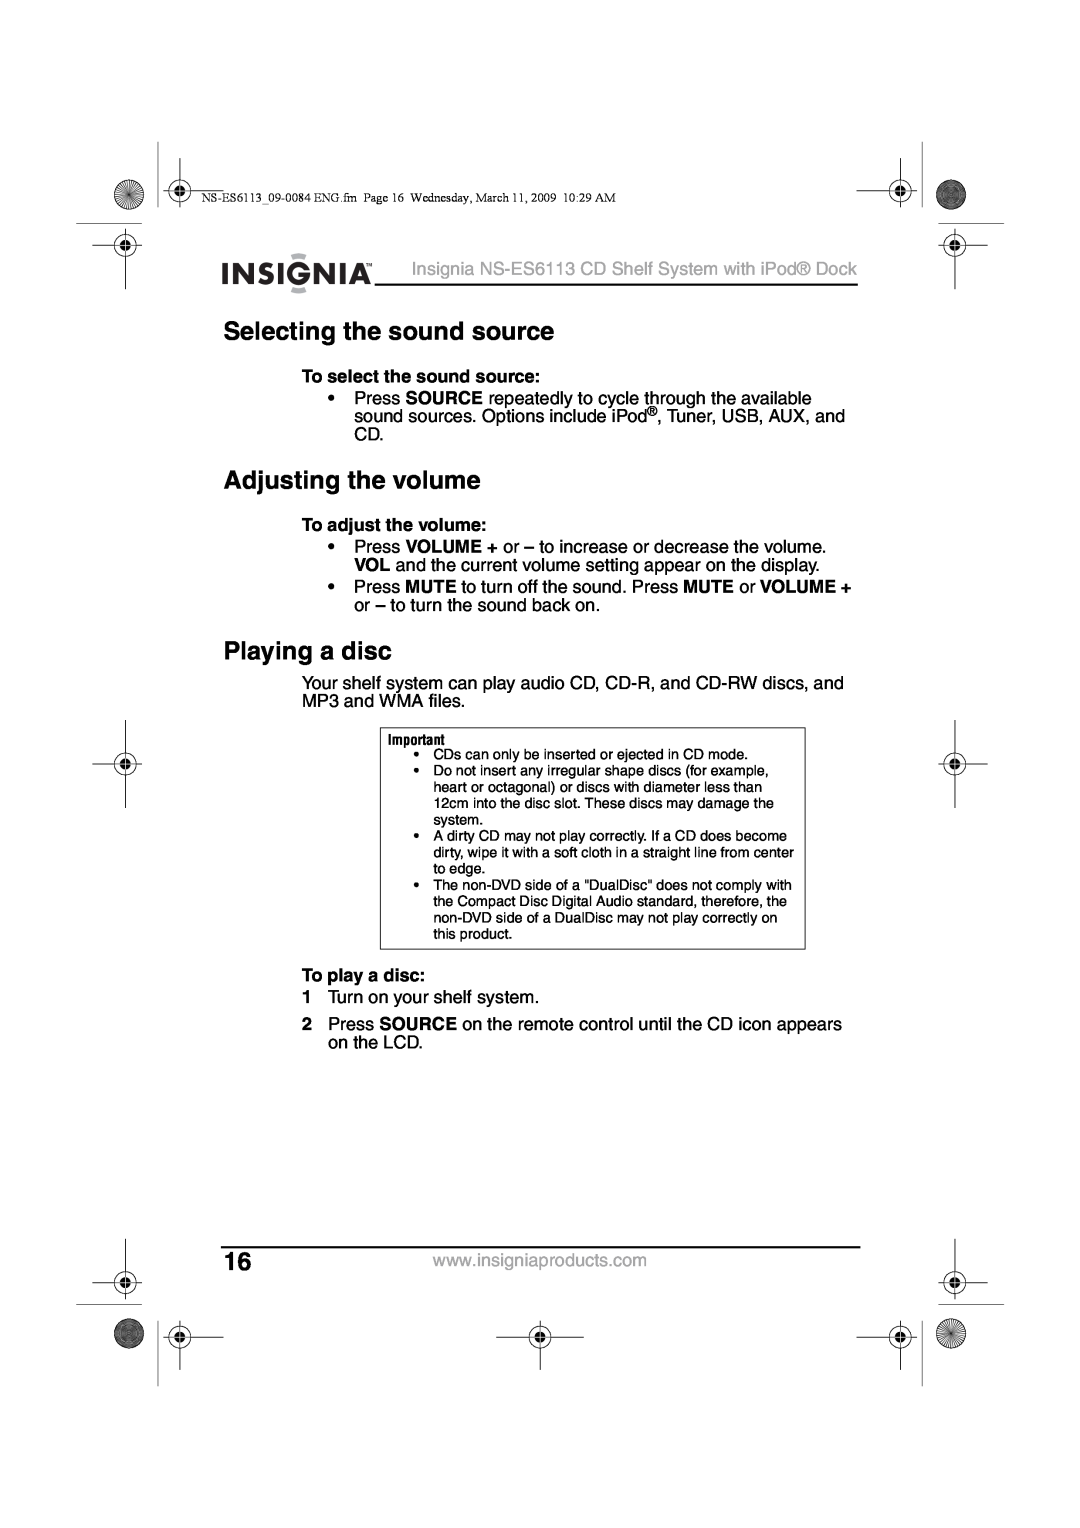 Insignia NS-ES6113 manual Selecting the sound source, Adjusting the volume, Playing a disc, To select the sound source 